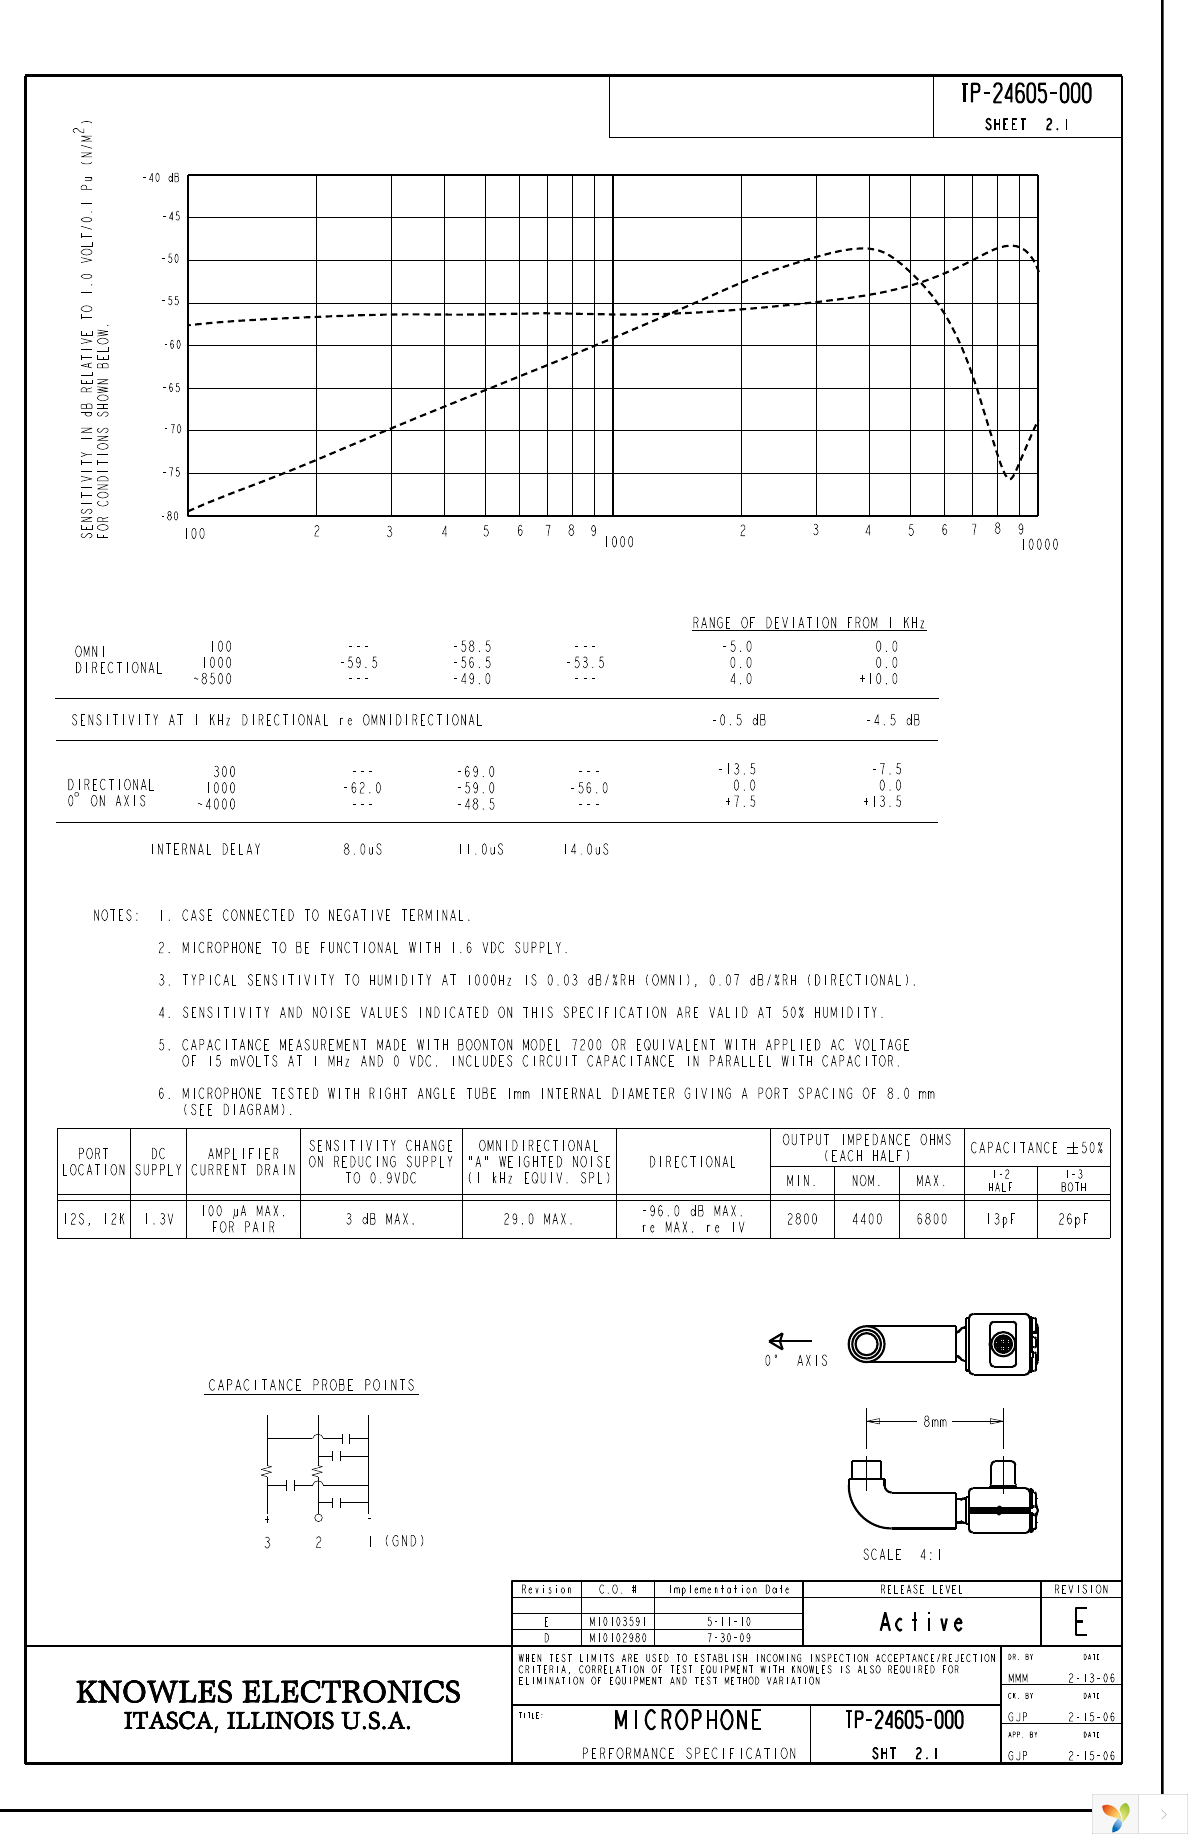 TP-24605-000 Page 2